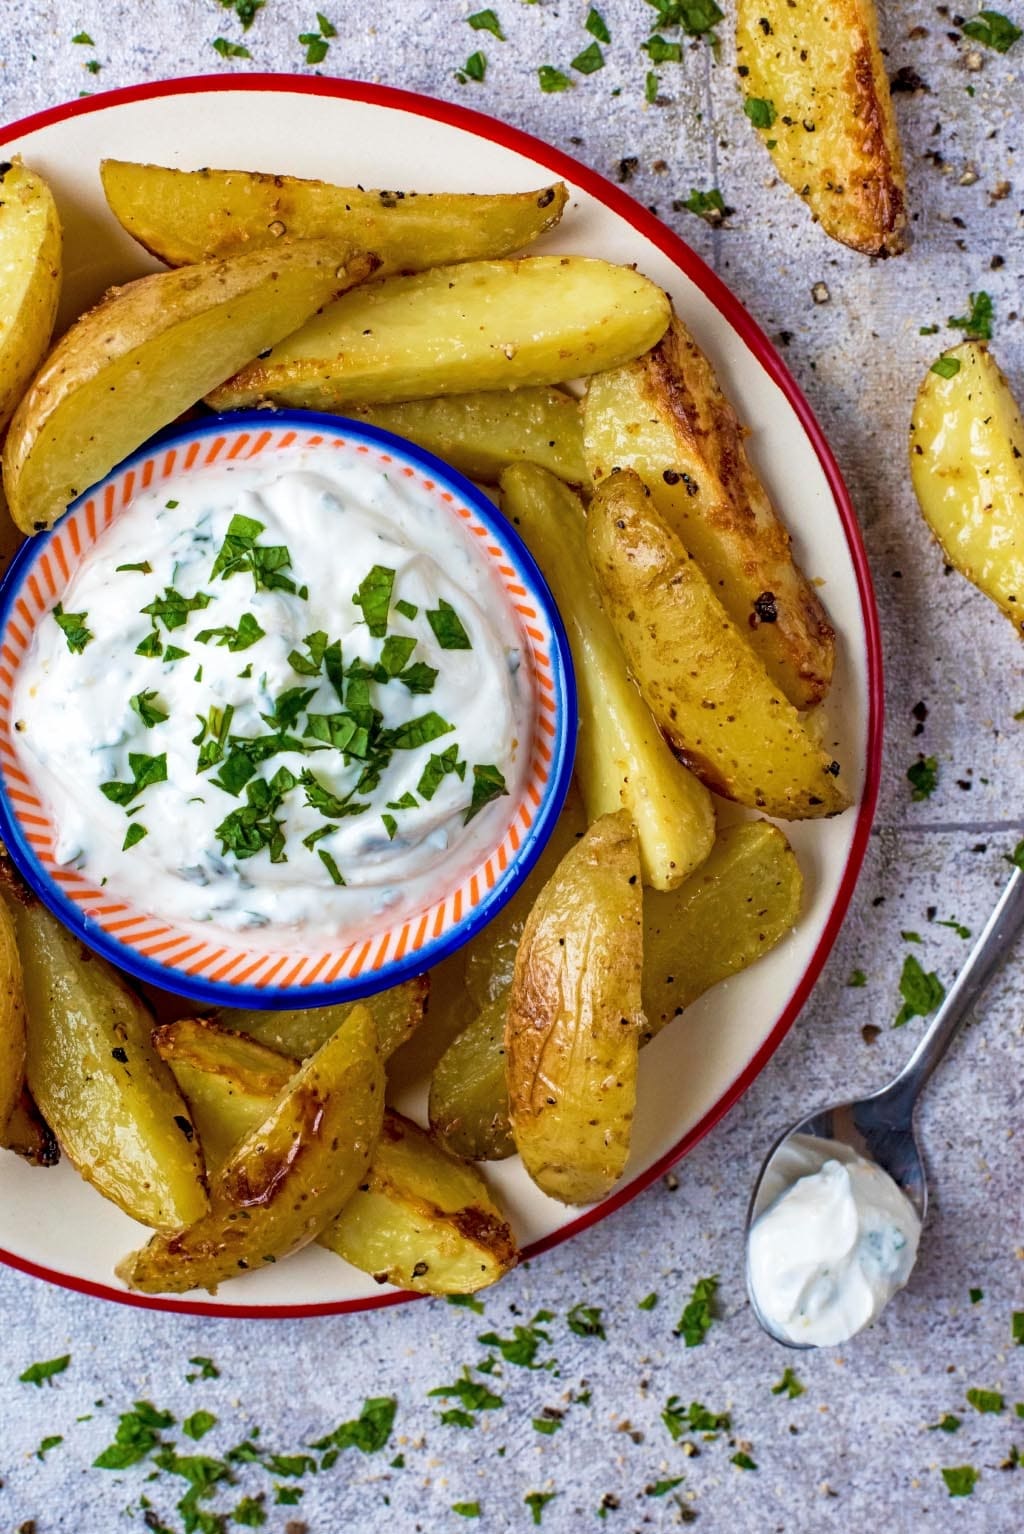 Potato Wedges and dip on a plate next to a spoonful of the dip.